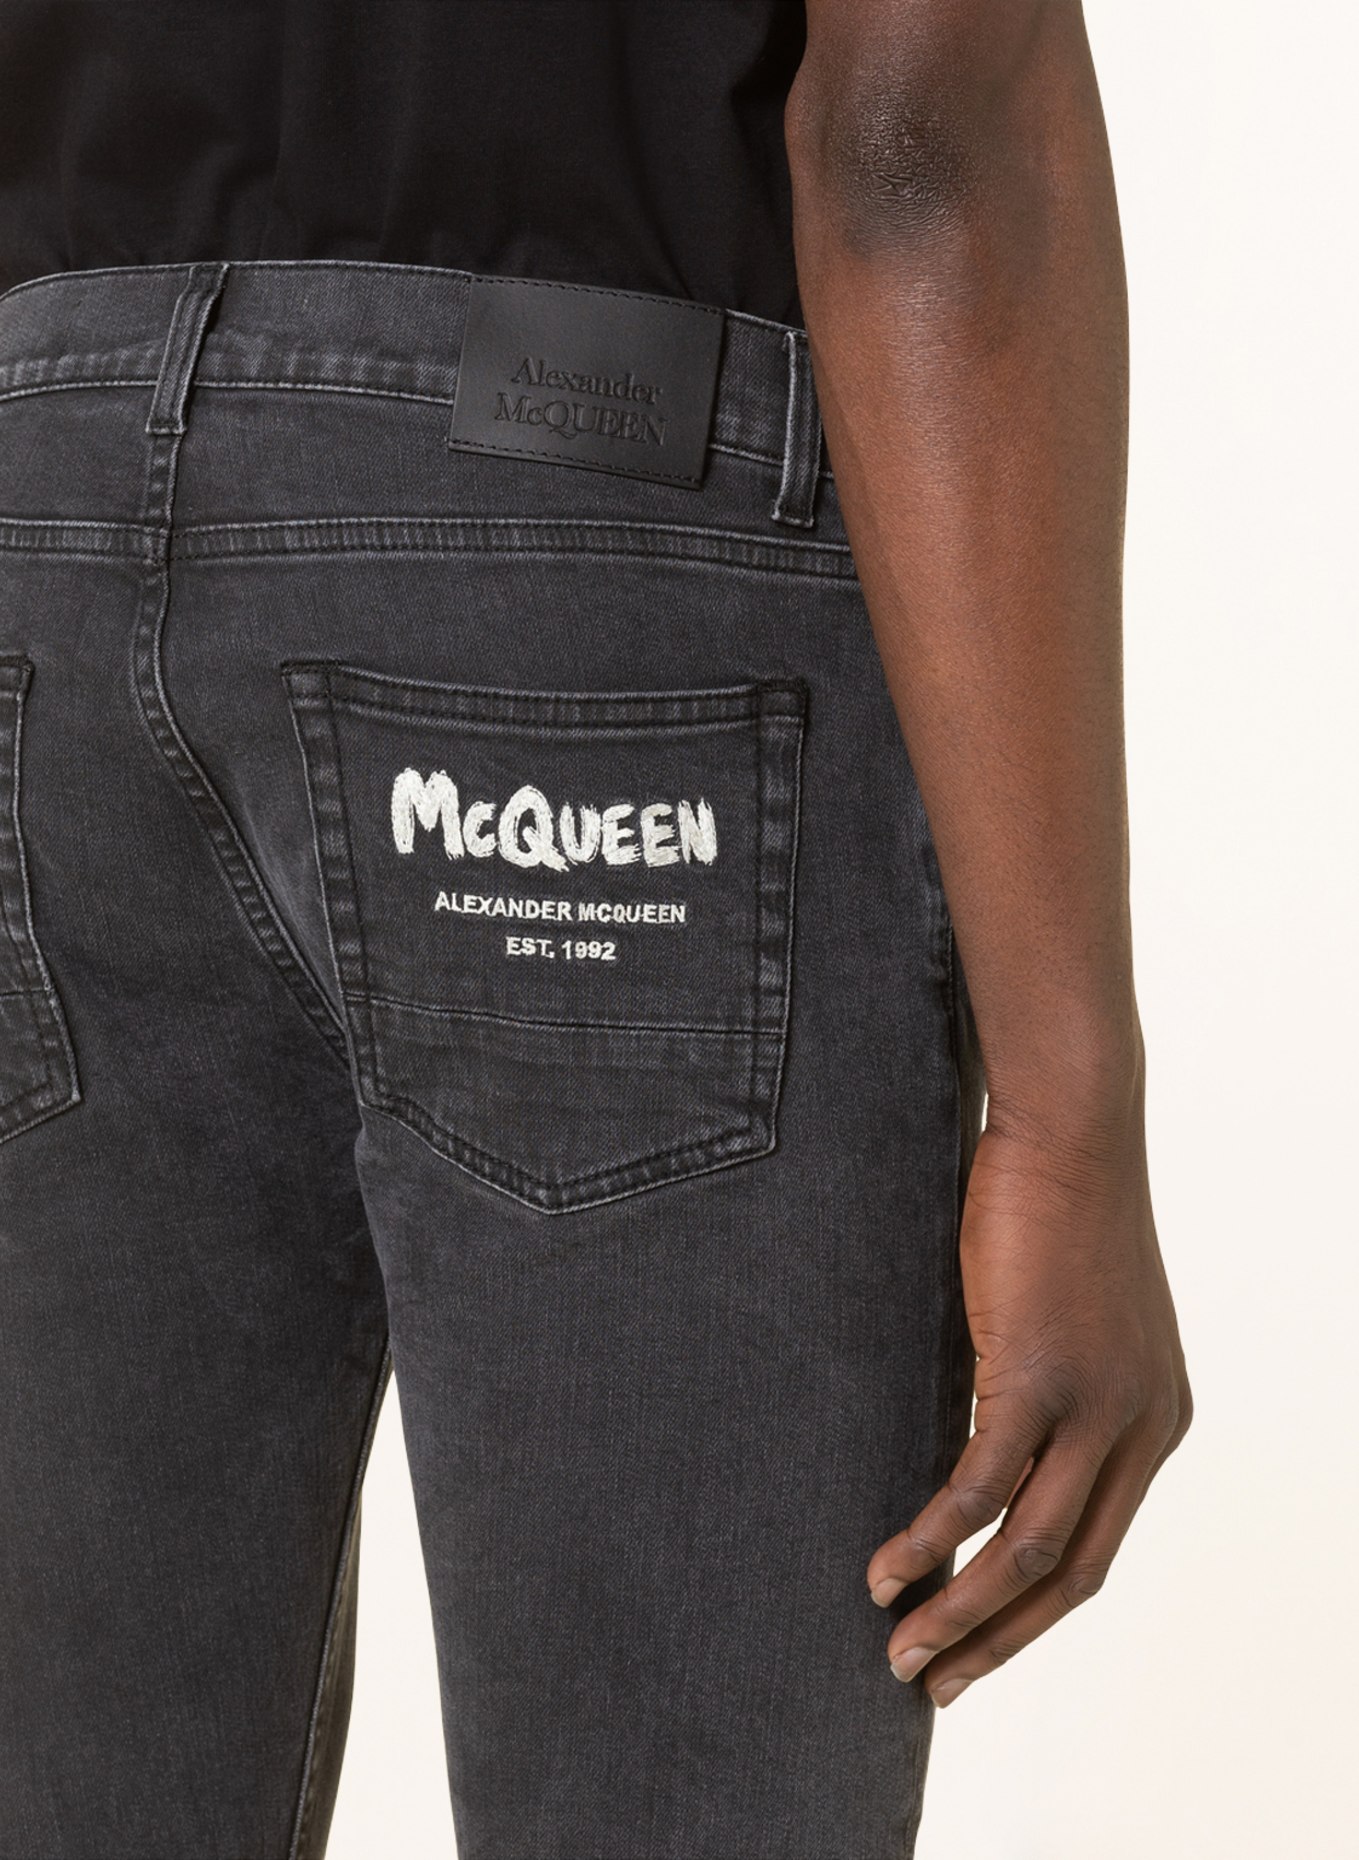 Alexander McQUEEN Jeans Extra Slim Fit , Farbe: 1001 black washed (Bild 5)